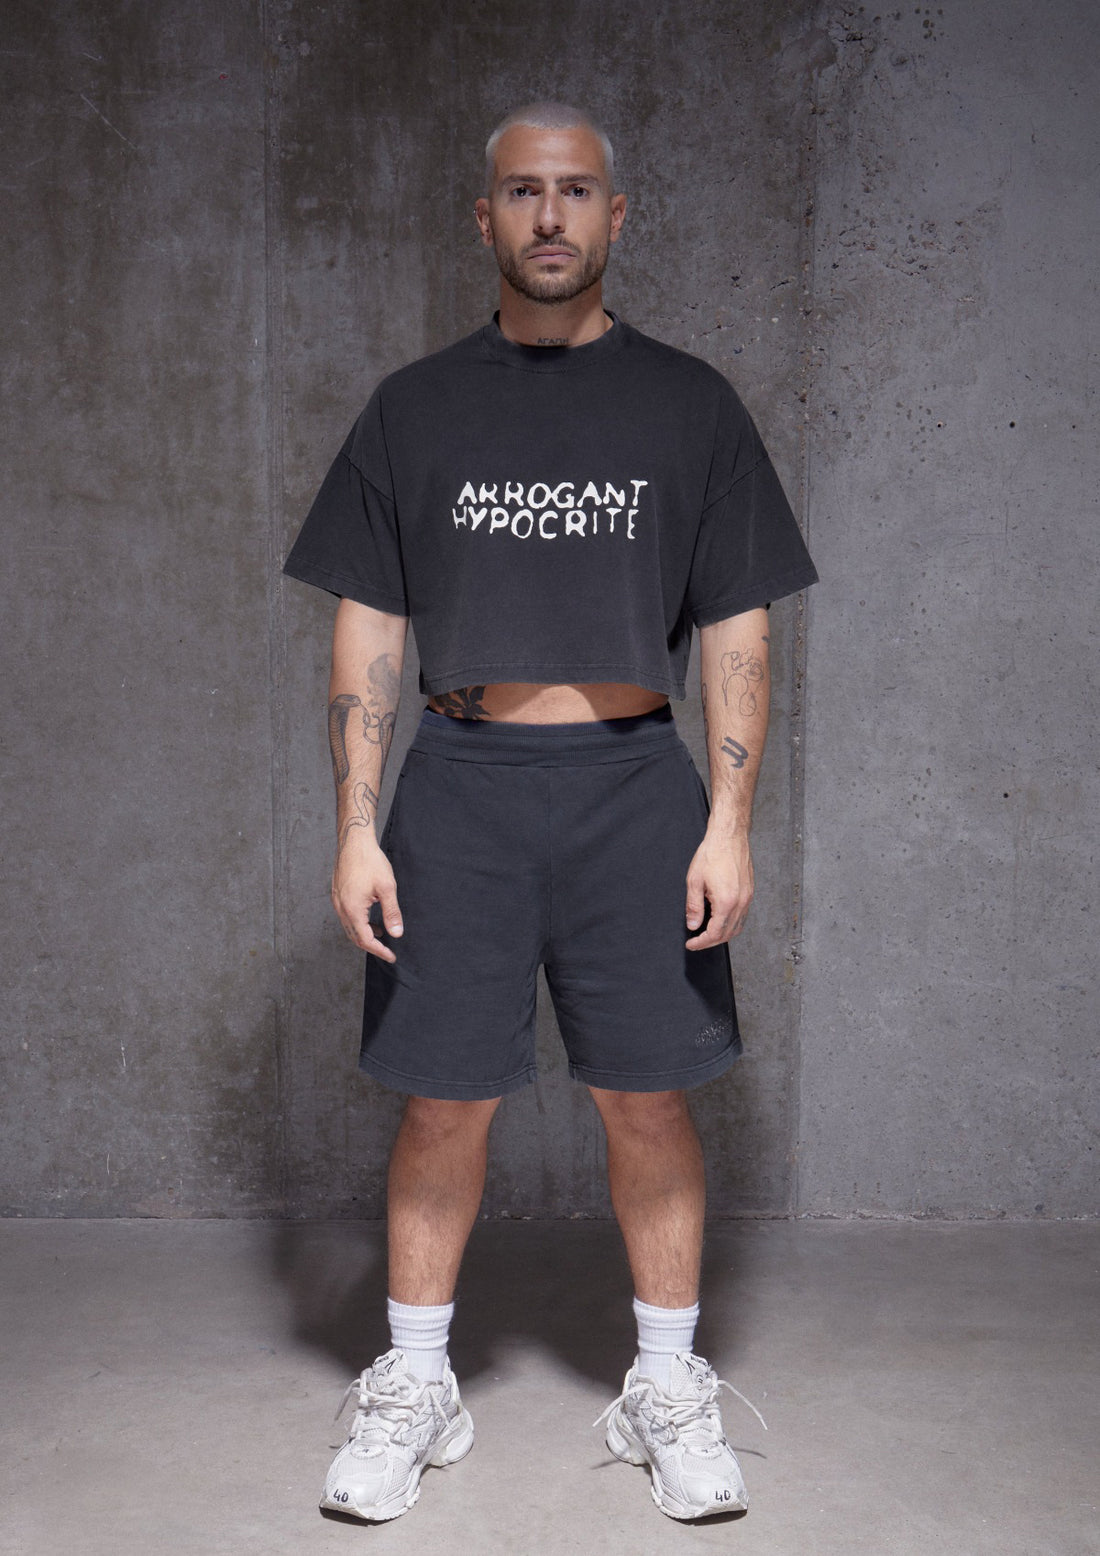 ARROGANT HYPOCRITE CROPPED TEE [CHARCOAL]